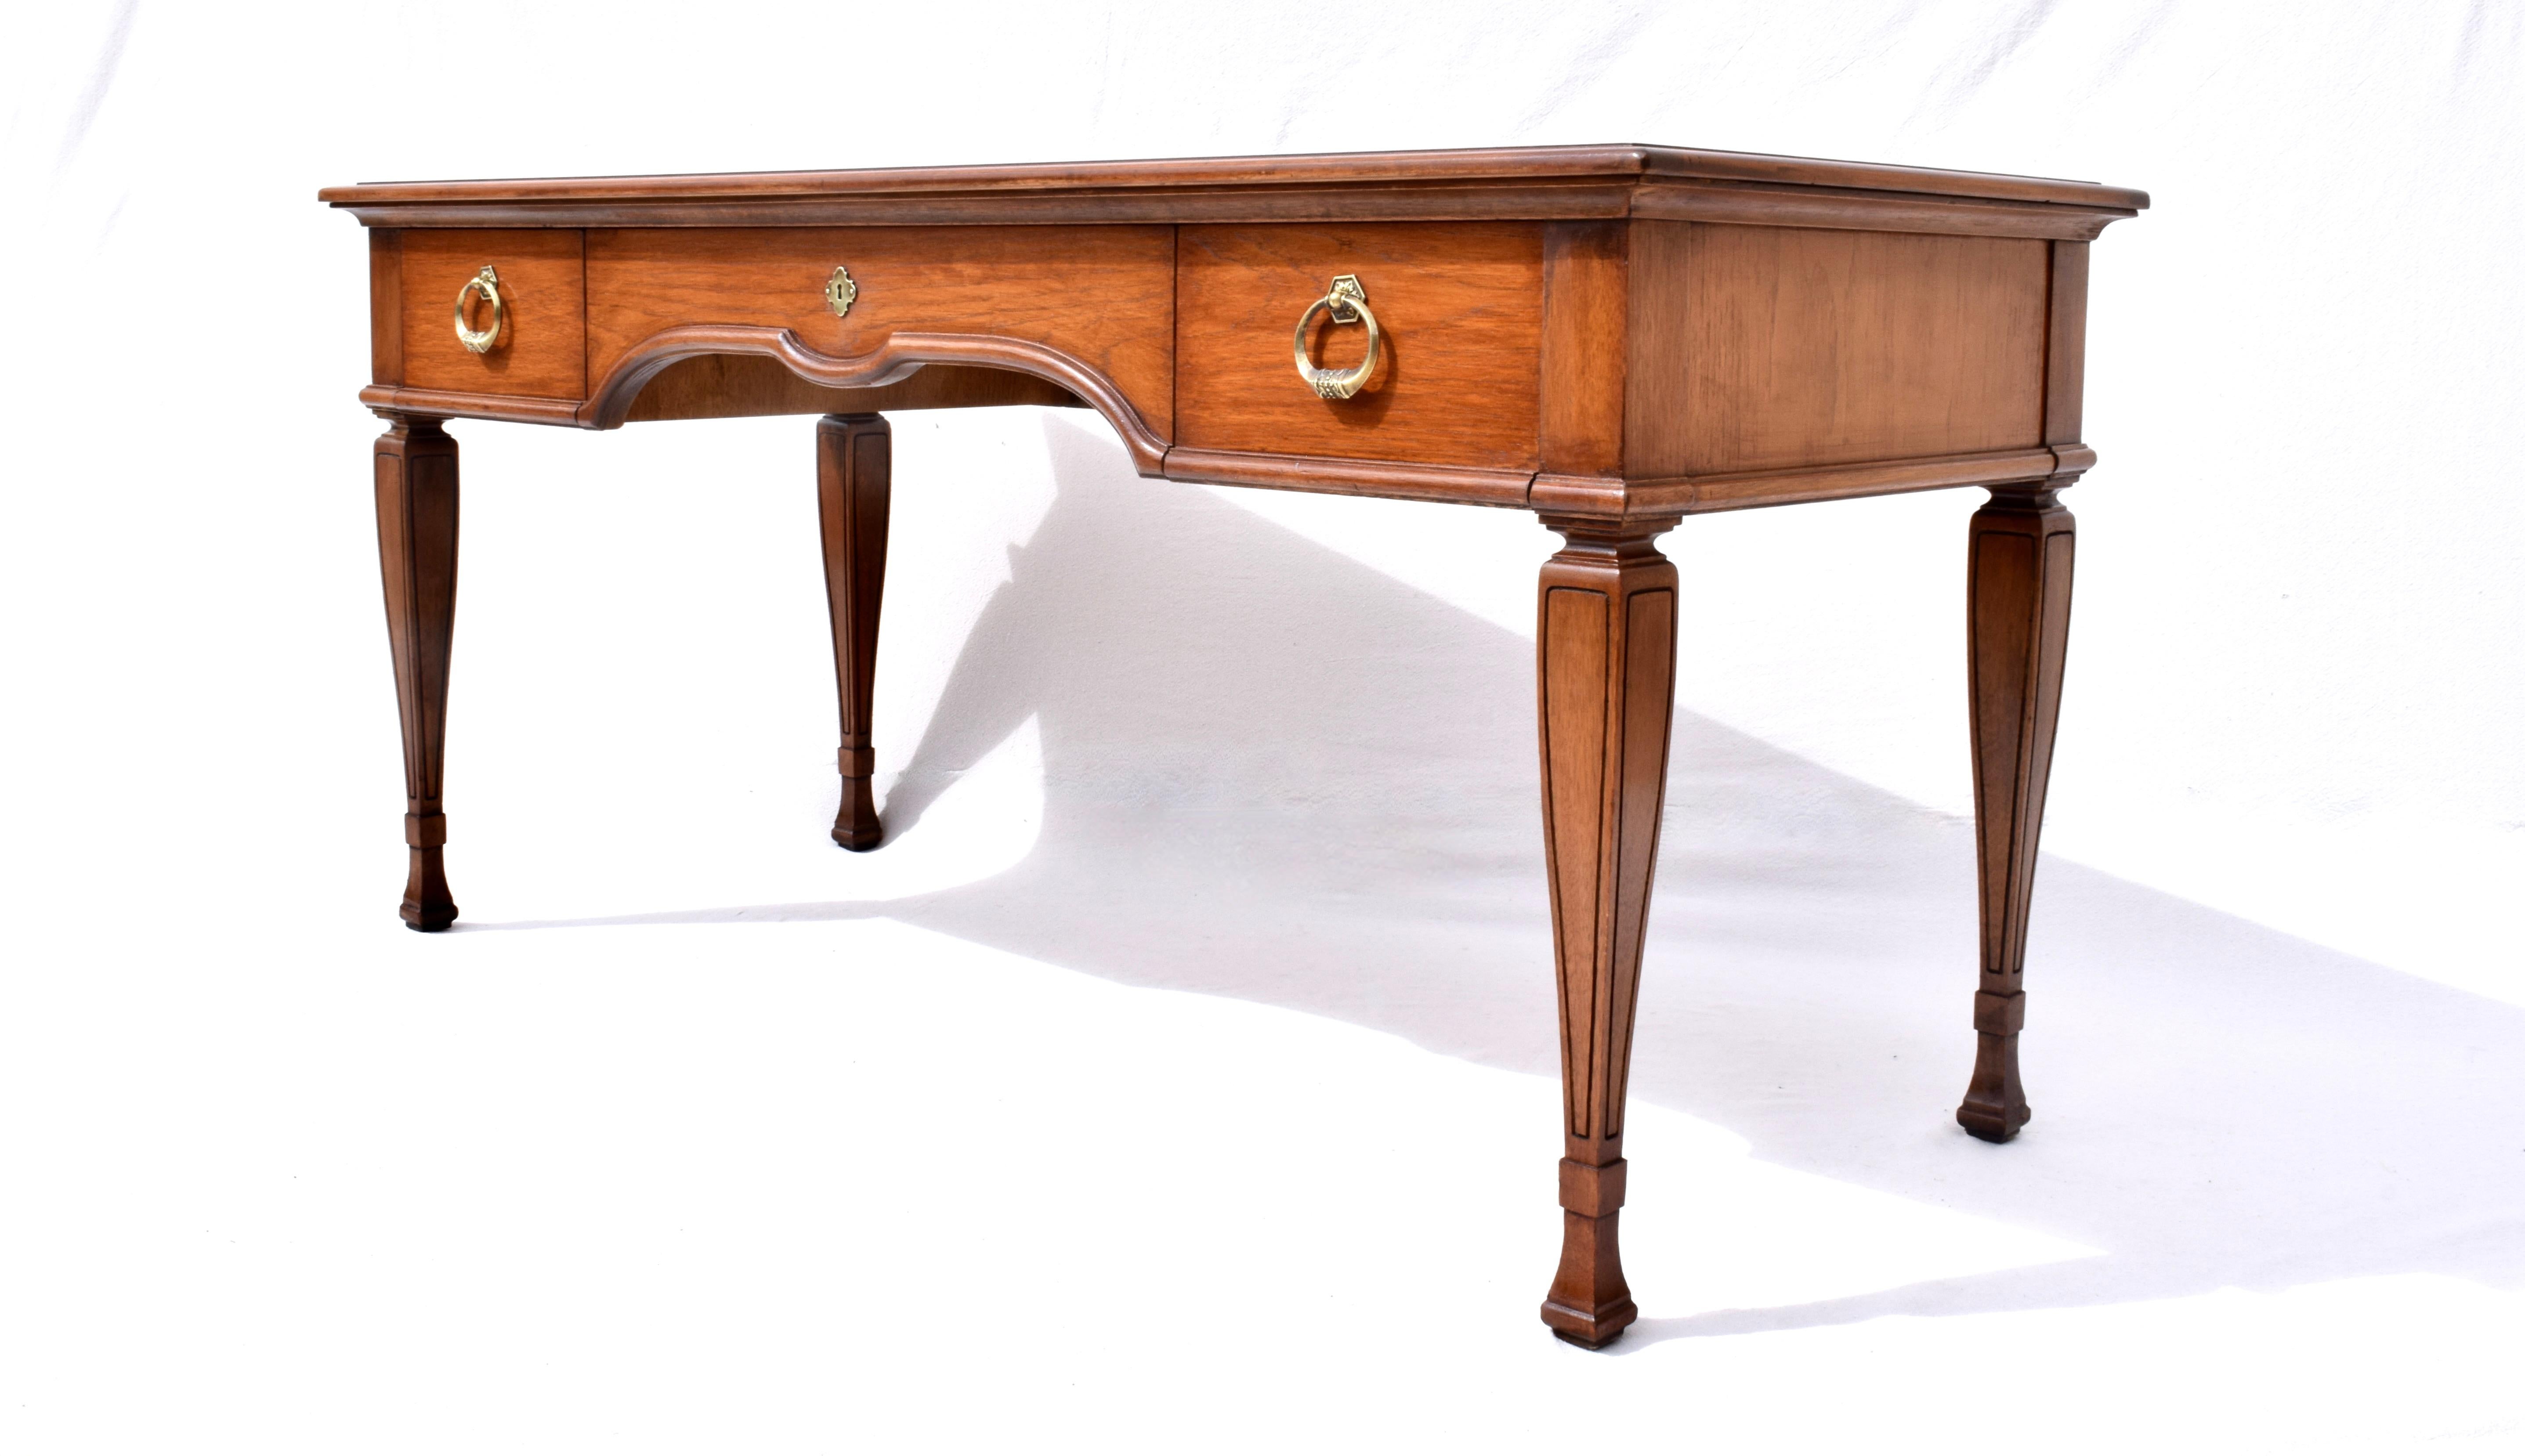 20th Century French Directoire Influenced Desk For Sale